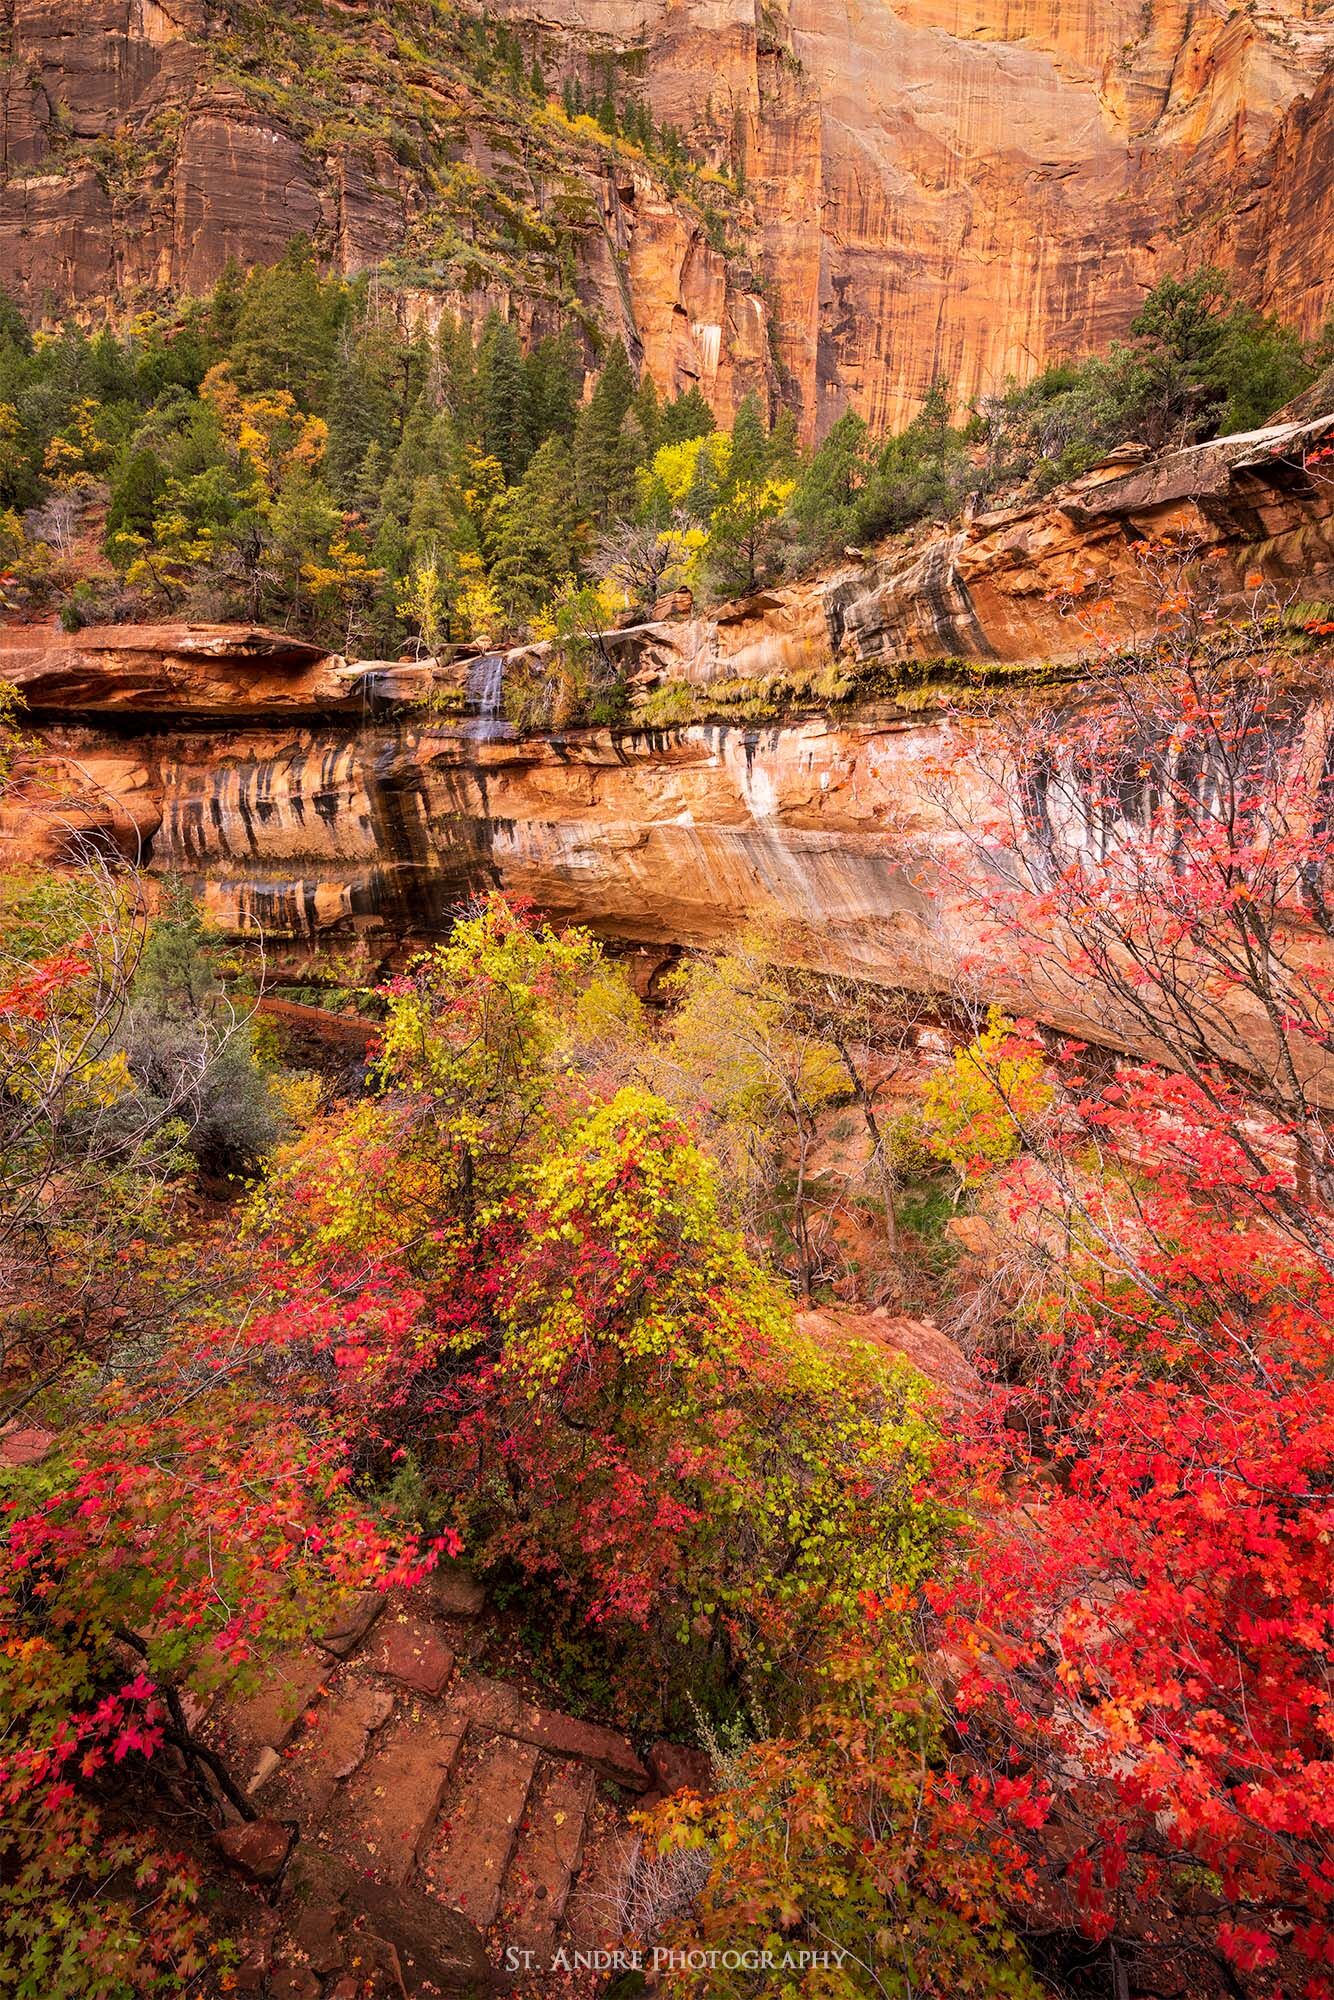 Emerald Pools in Zion National Park in Southern Utah. The image shows fall colors and a staircase leading toward an unknown location. 